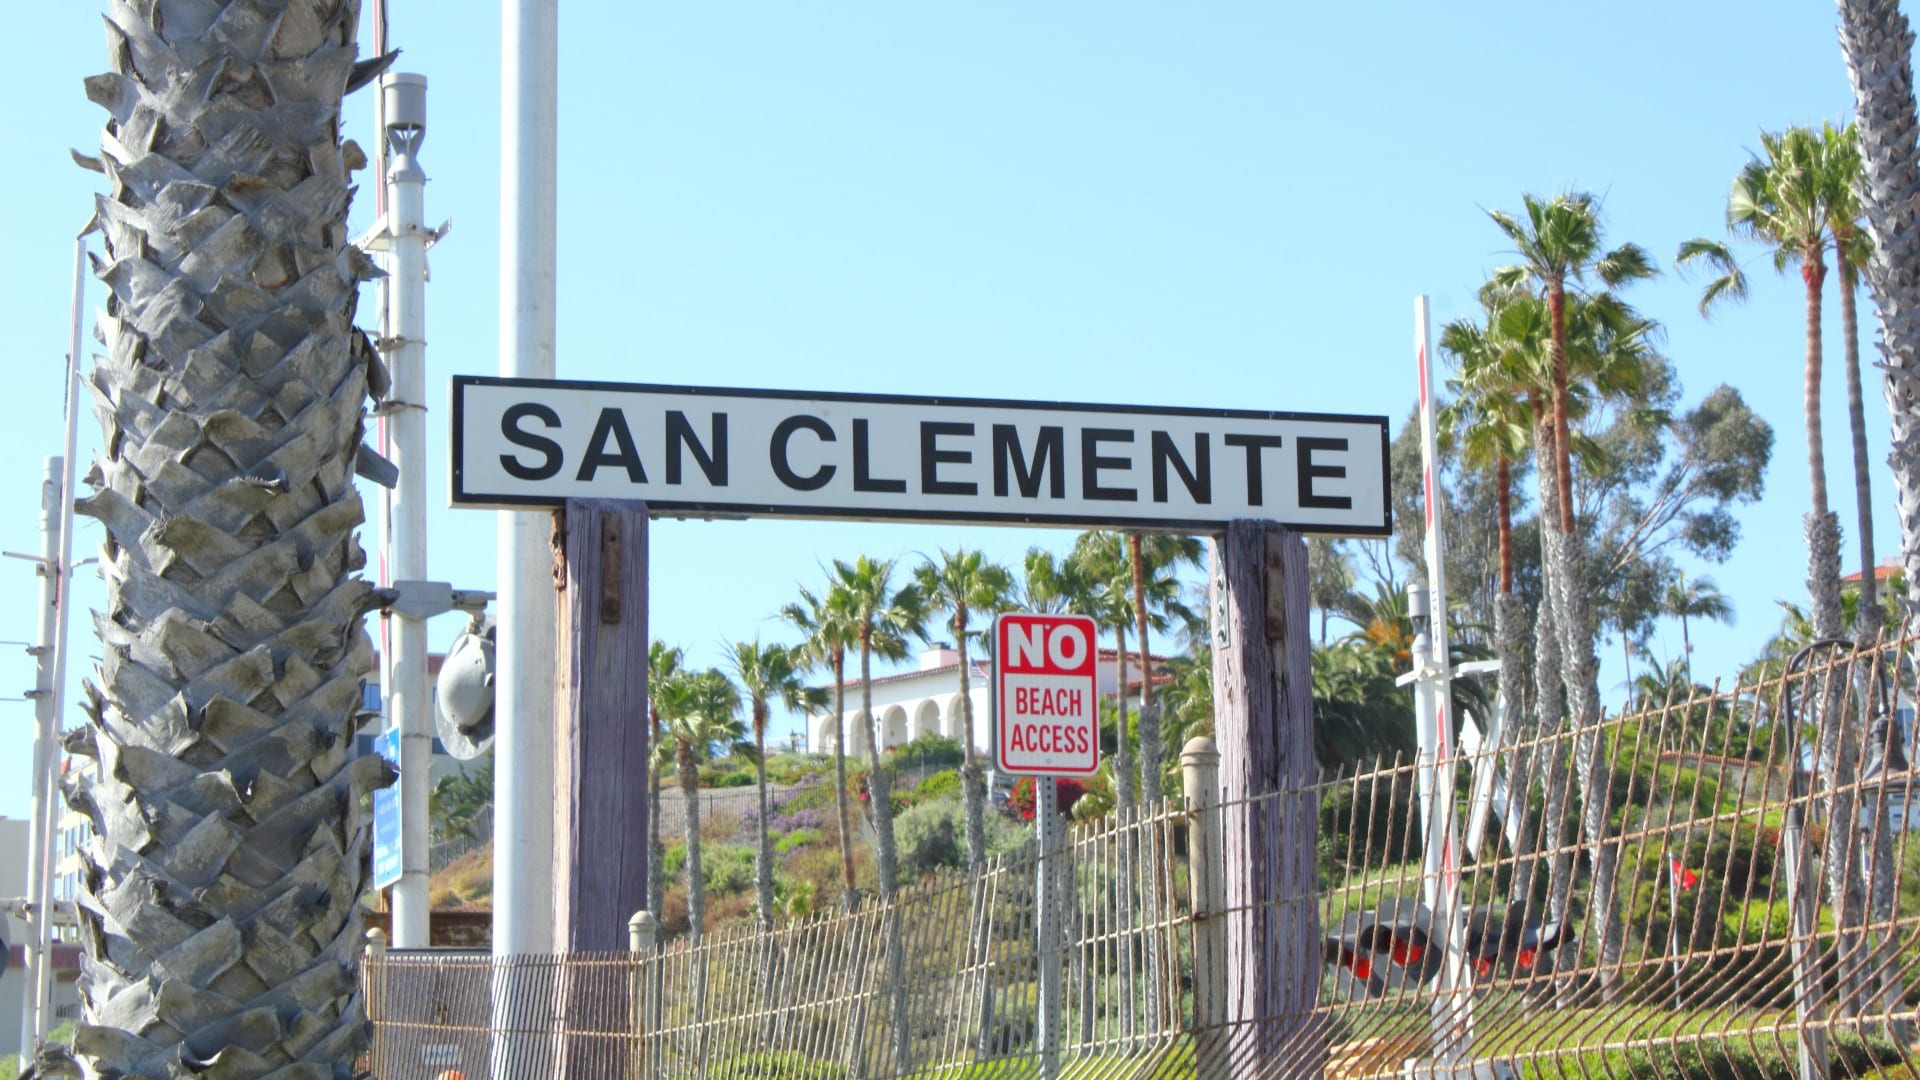 Street sign for San Clemente near a fence and palm trees